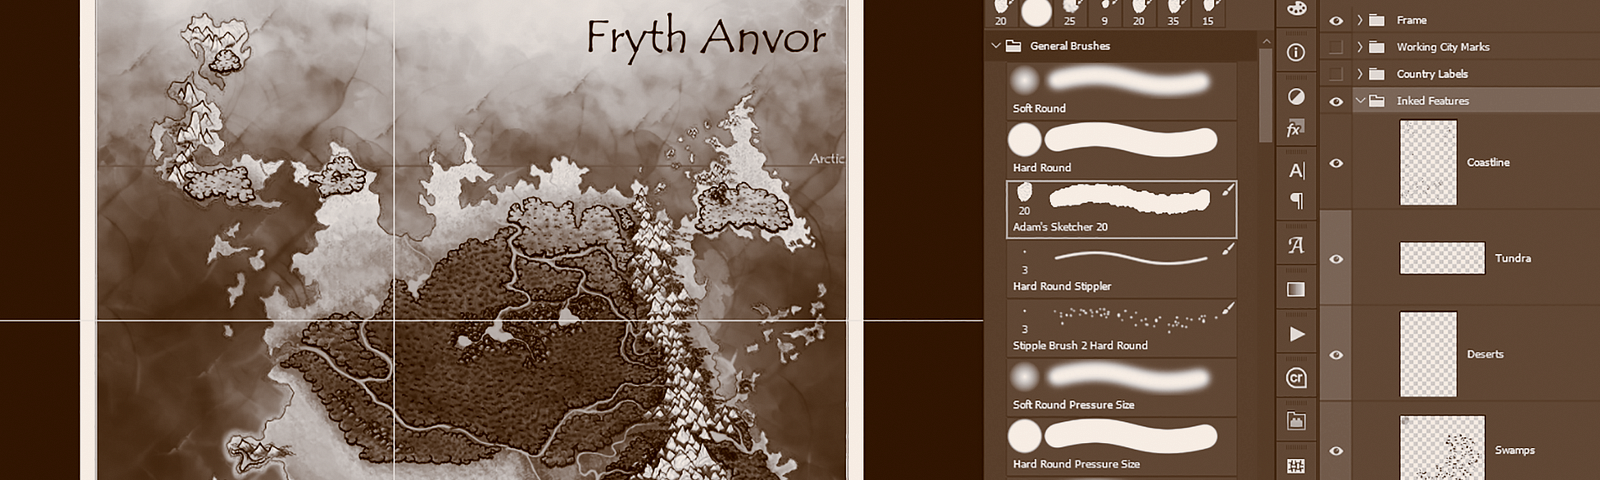 Screenshot of the photoshop file being worked on for the world map of Fryth Anvor. Personal screenshot. Personal photoshop digital painting.